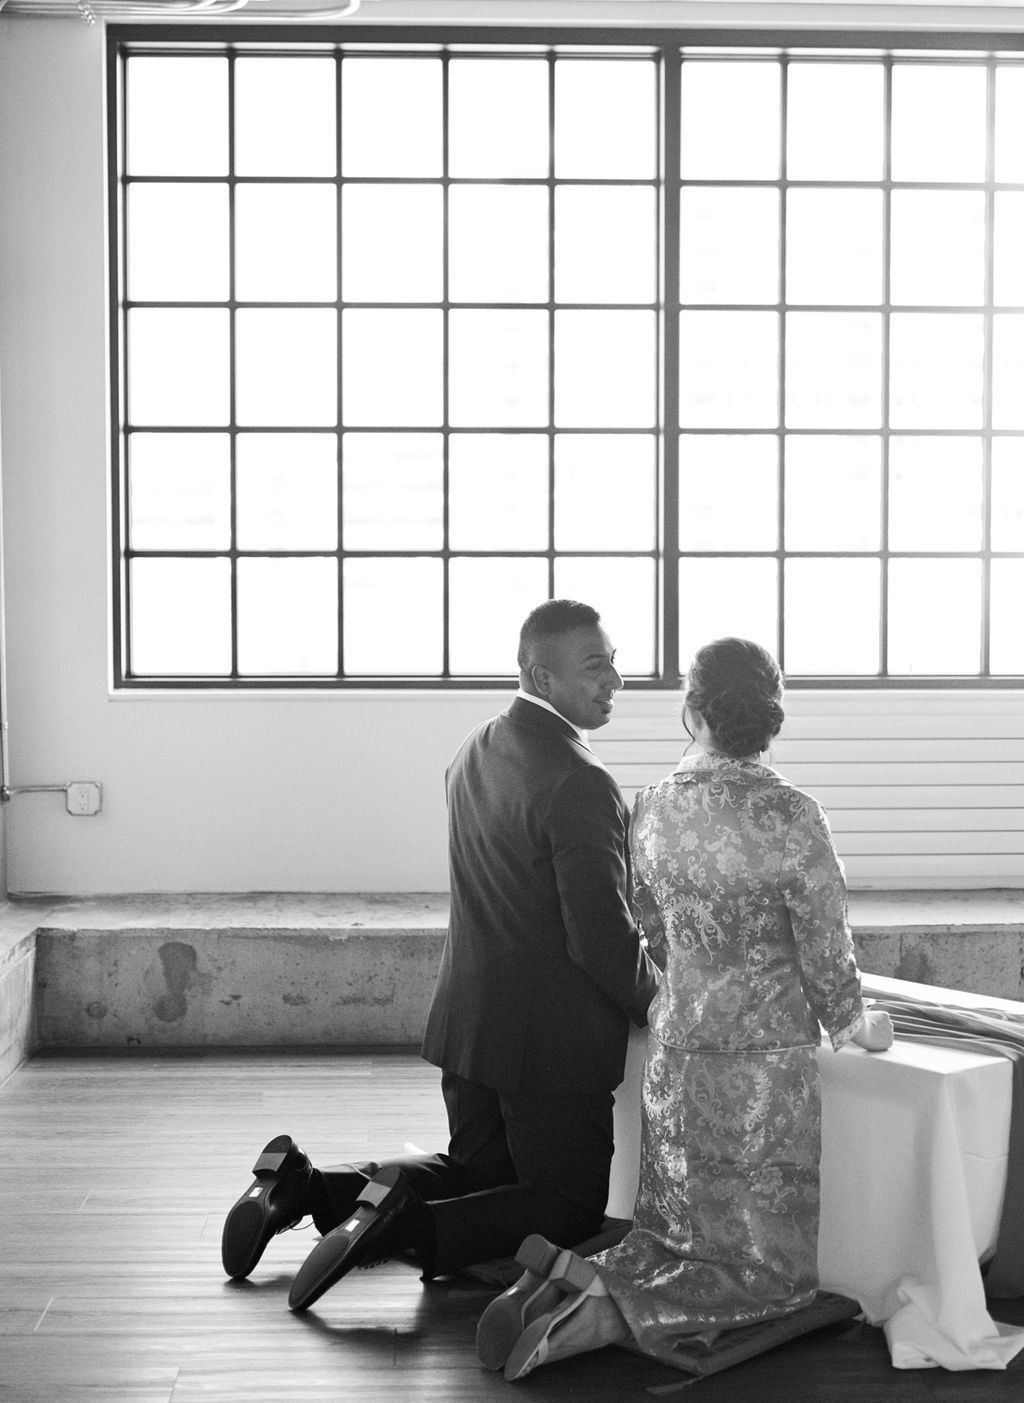 Multicultural wedding inspiration in Vancouver, couple shares intimate moment during tea ceremony